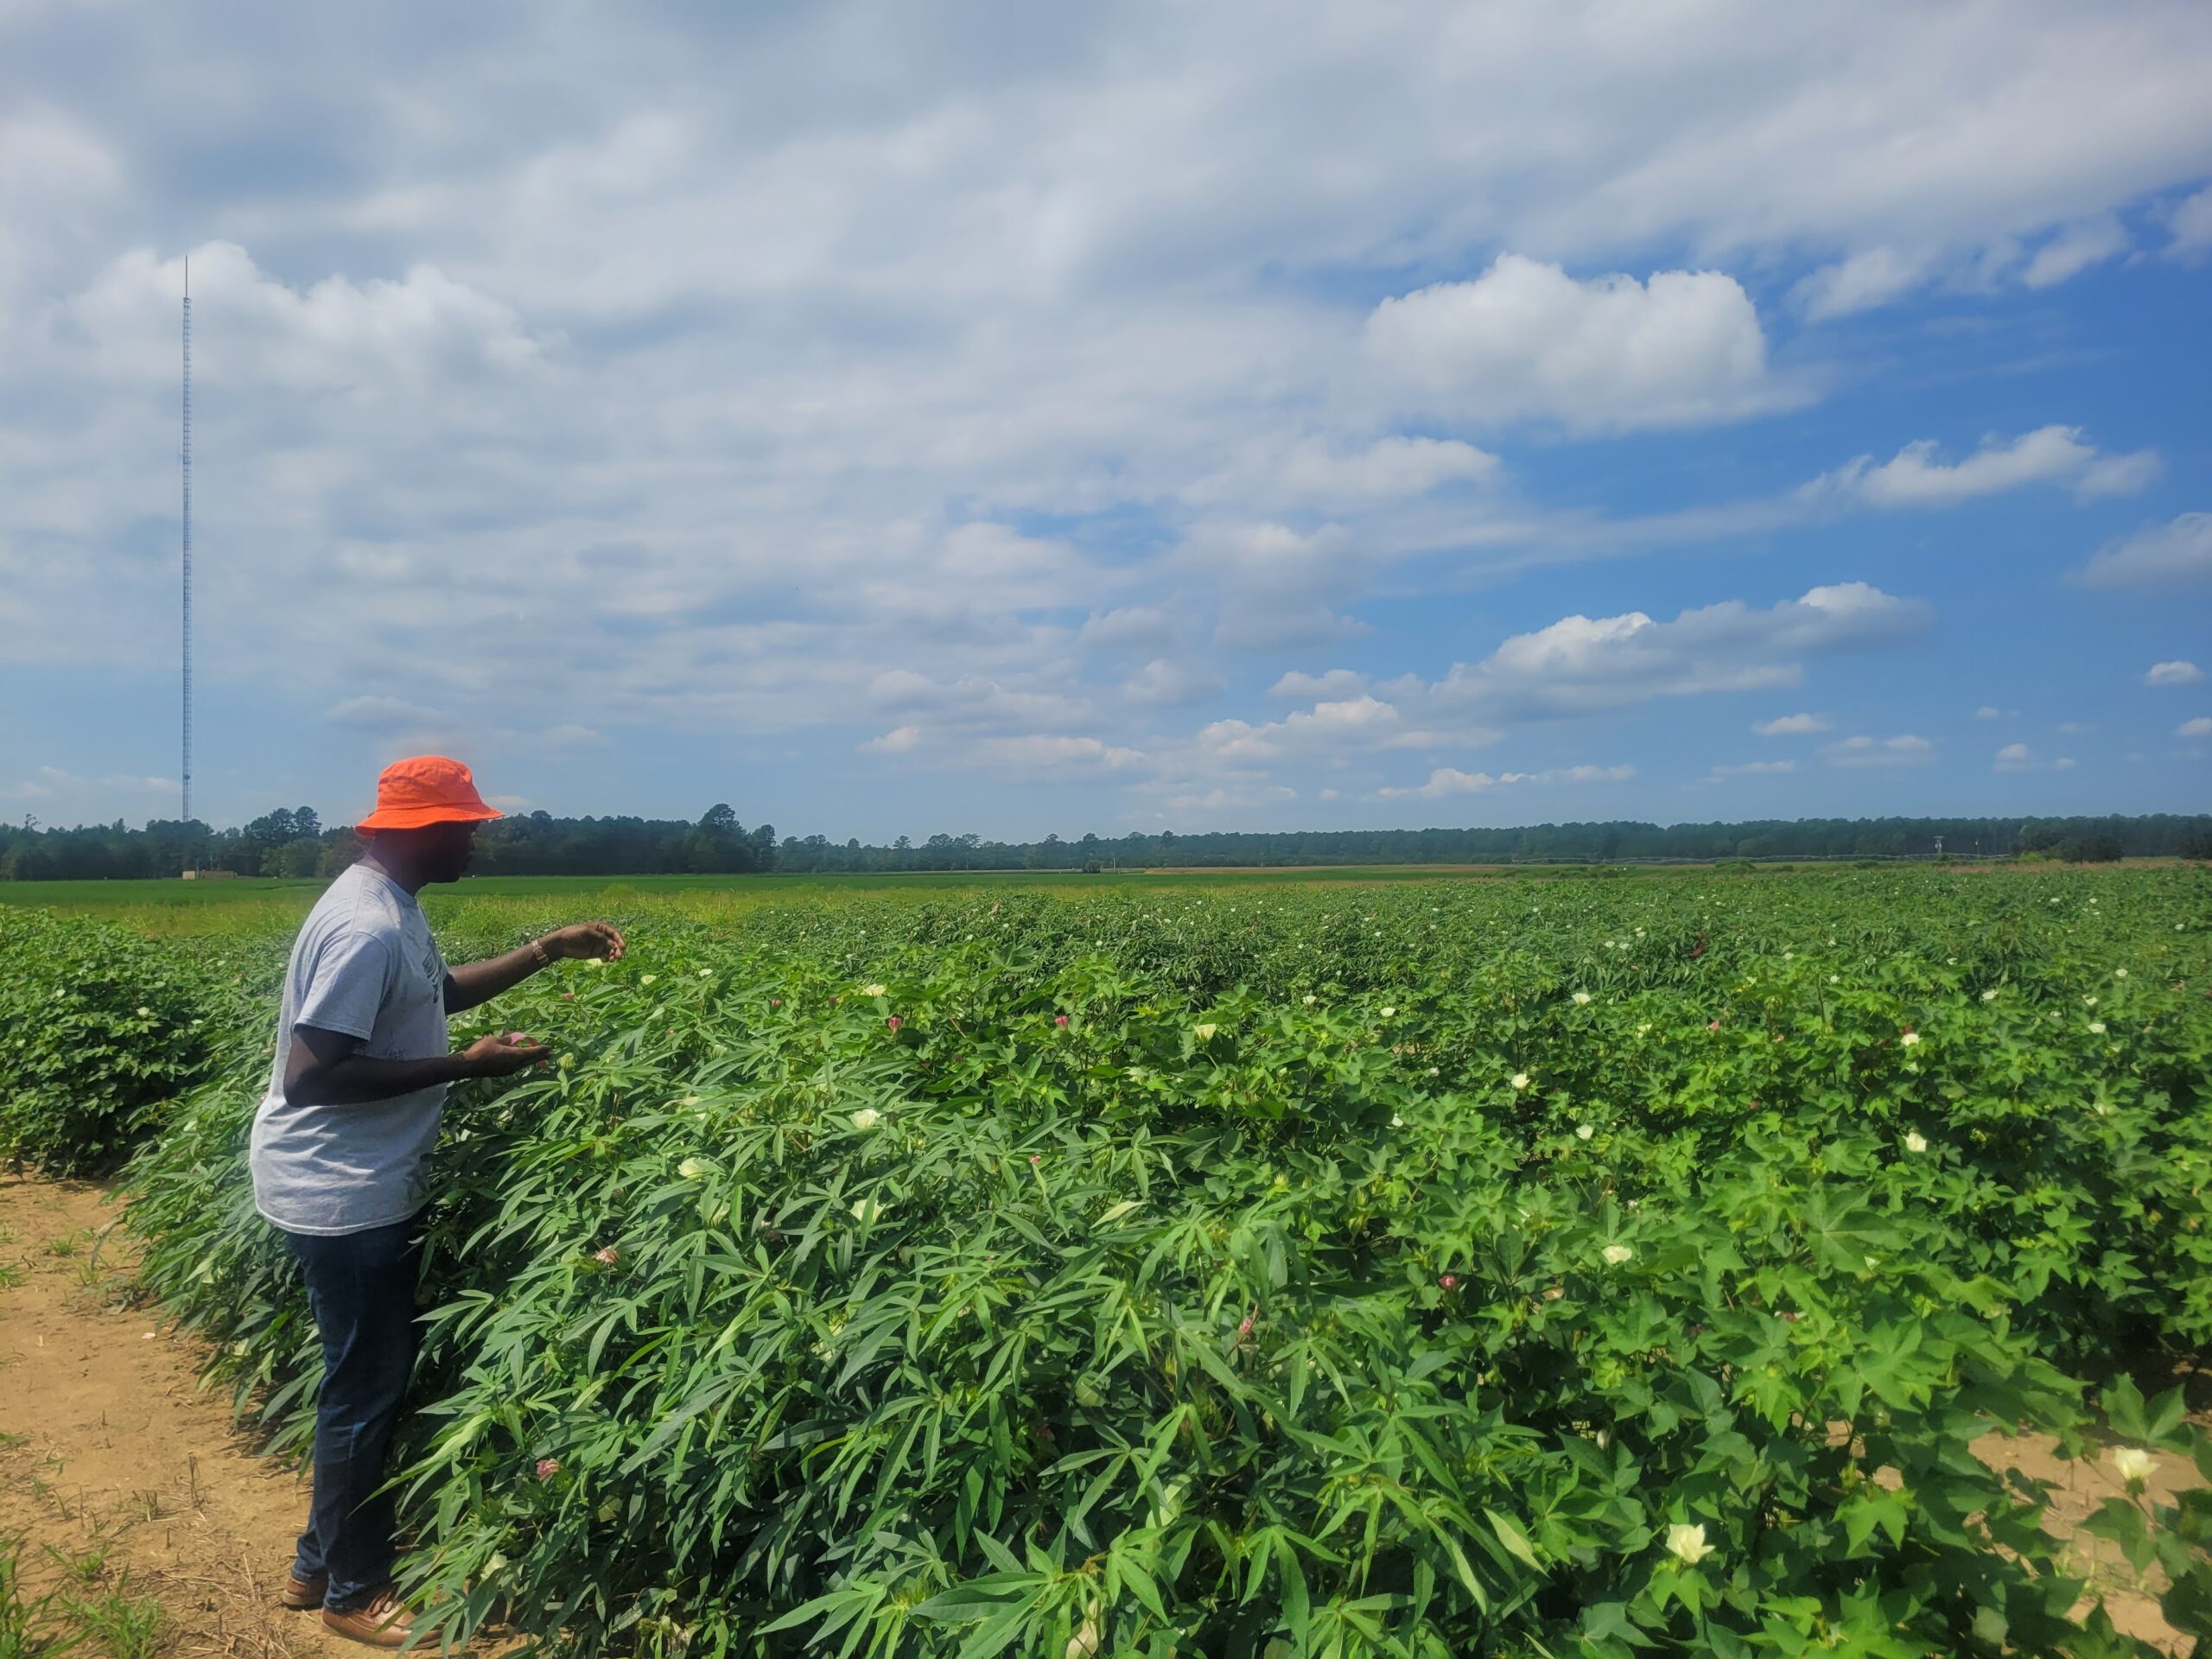 A man in an orange hat stands on the edge of a large cotton field.